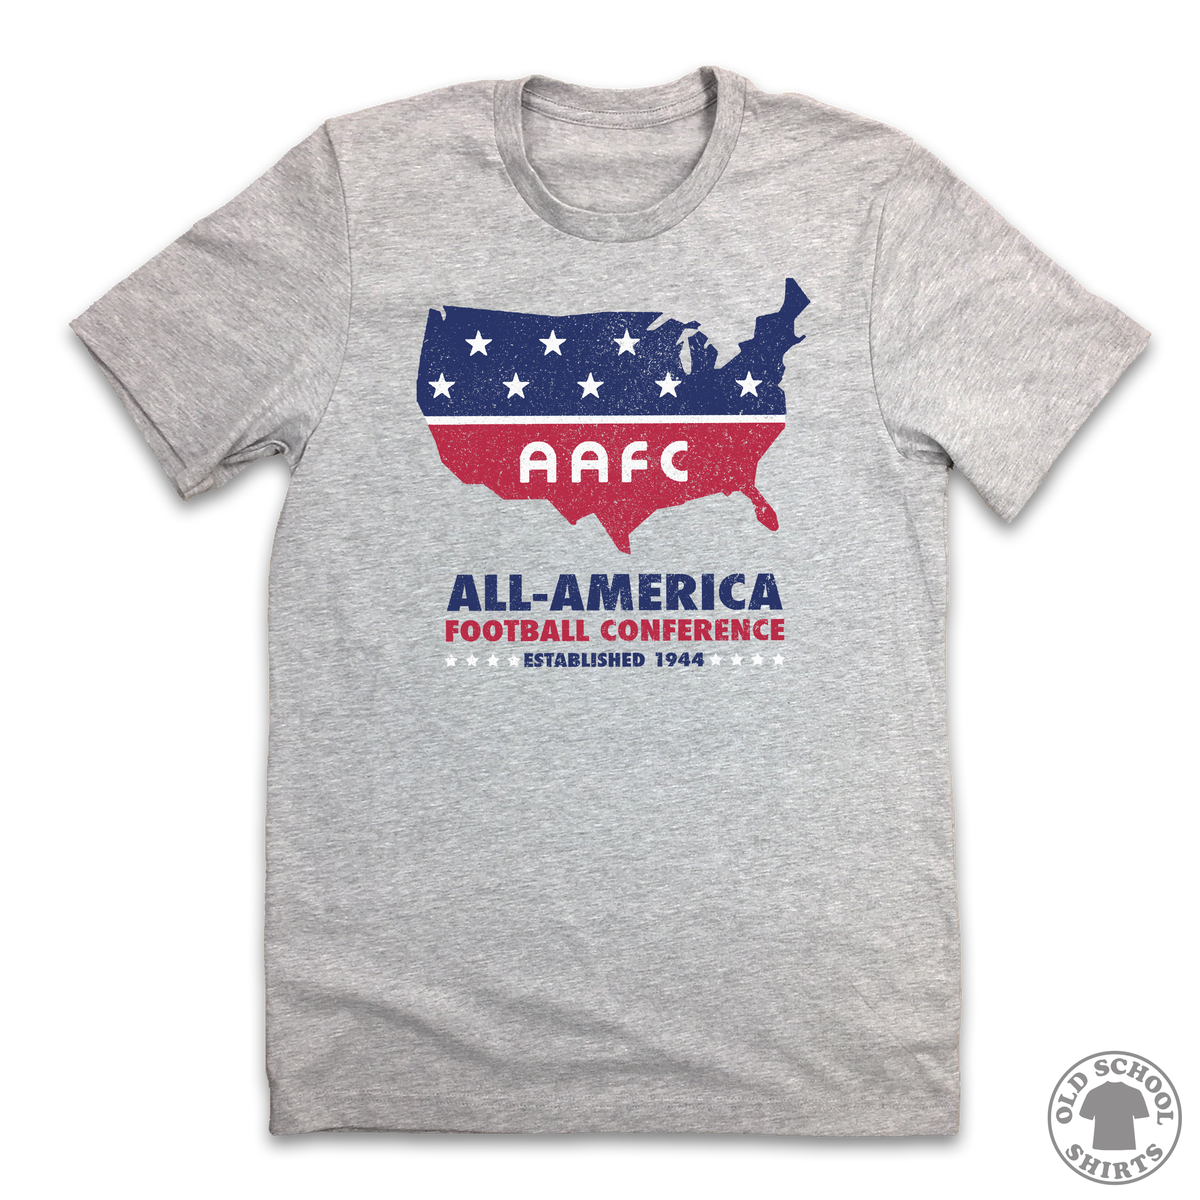 All-America Football Conference - Old School Shirts- Retro Sports T Shirts